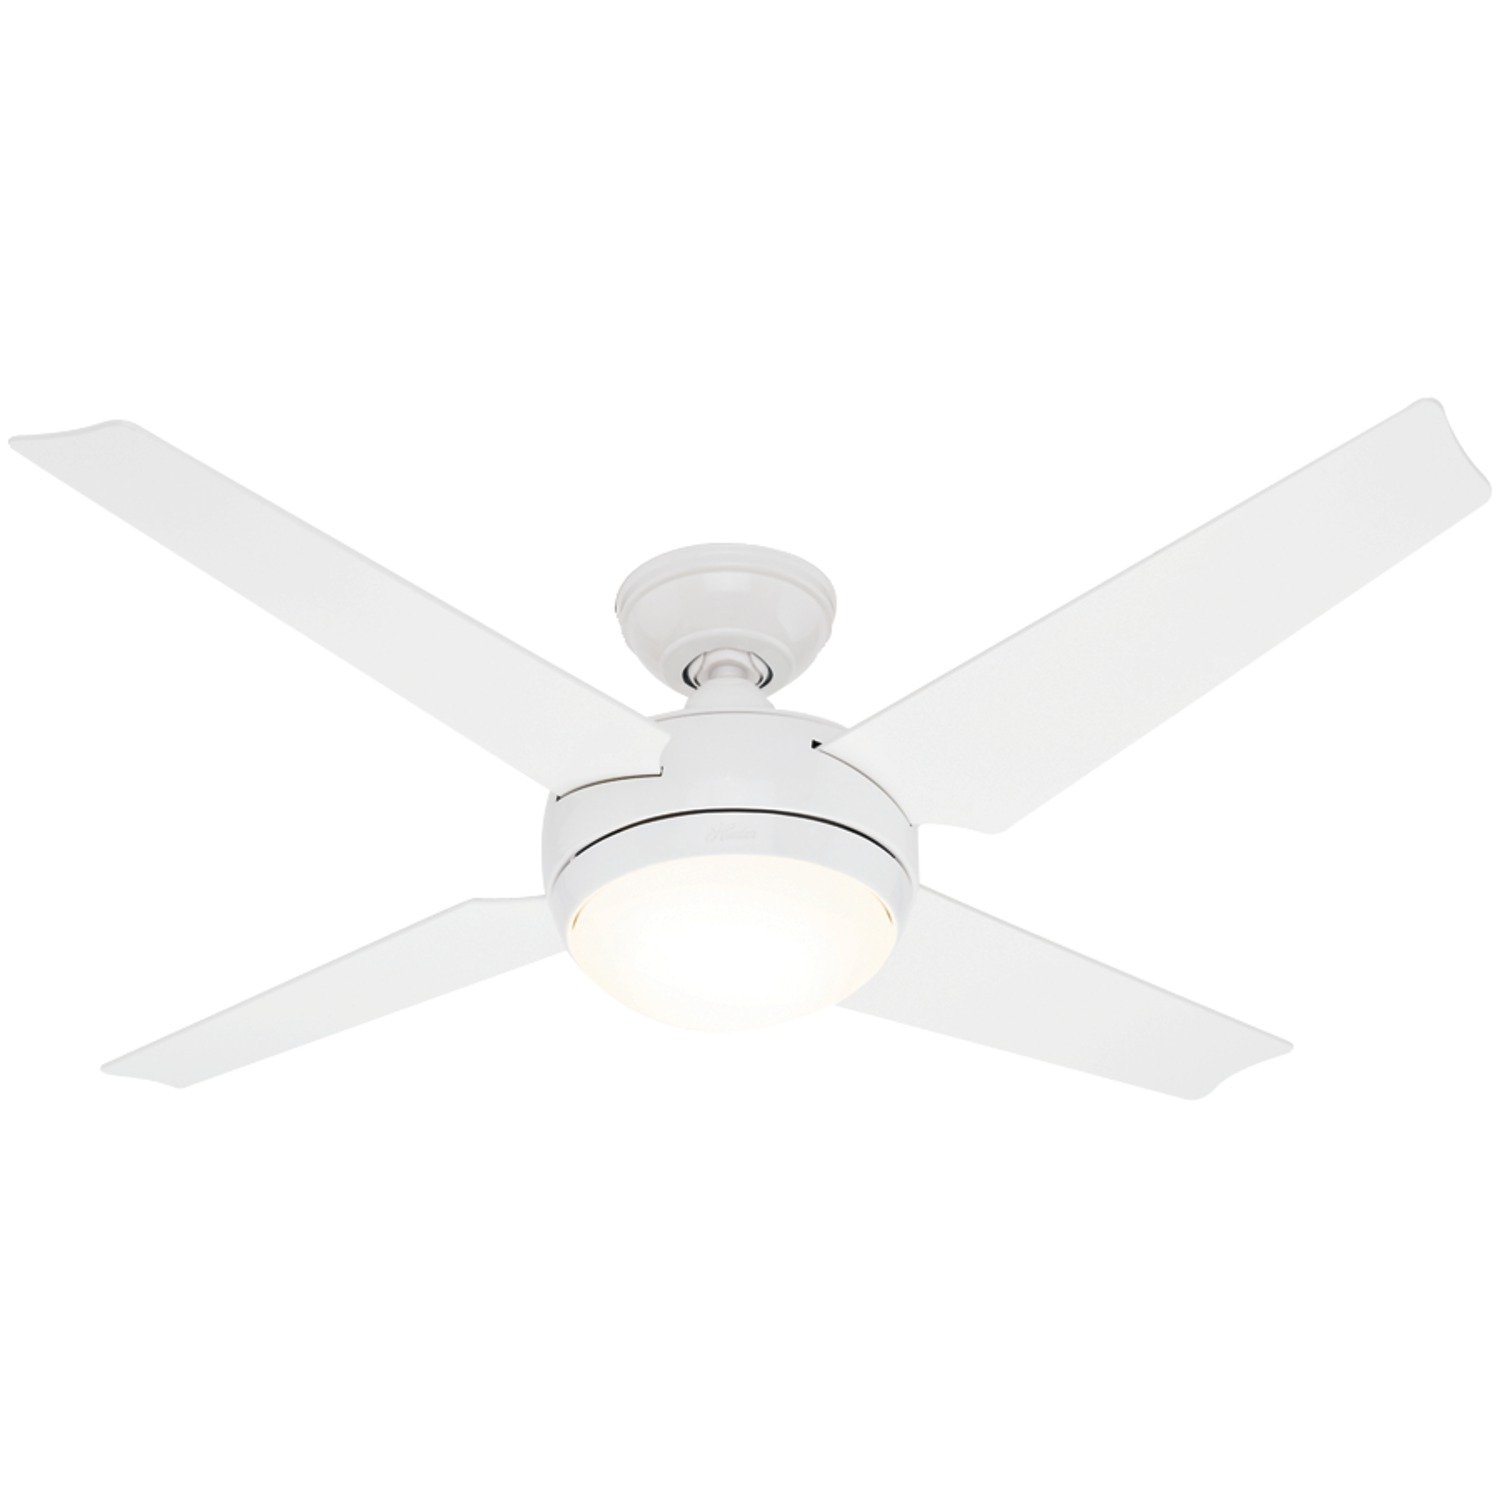 Small White Ceiling Fan With Light